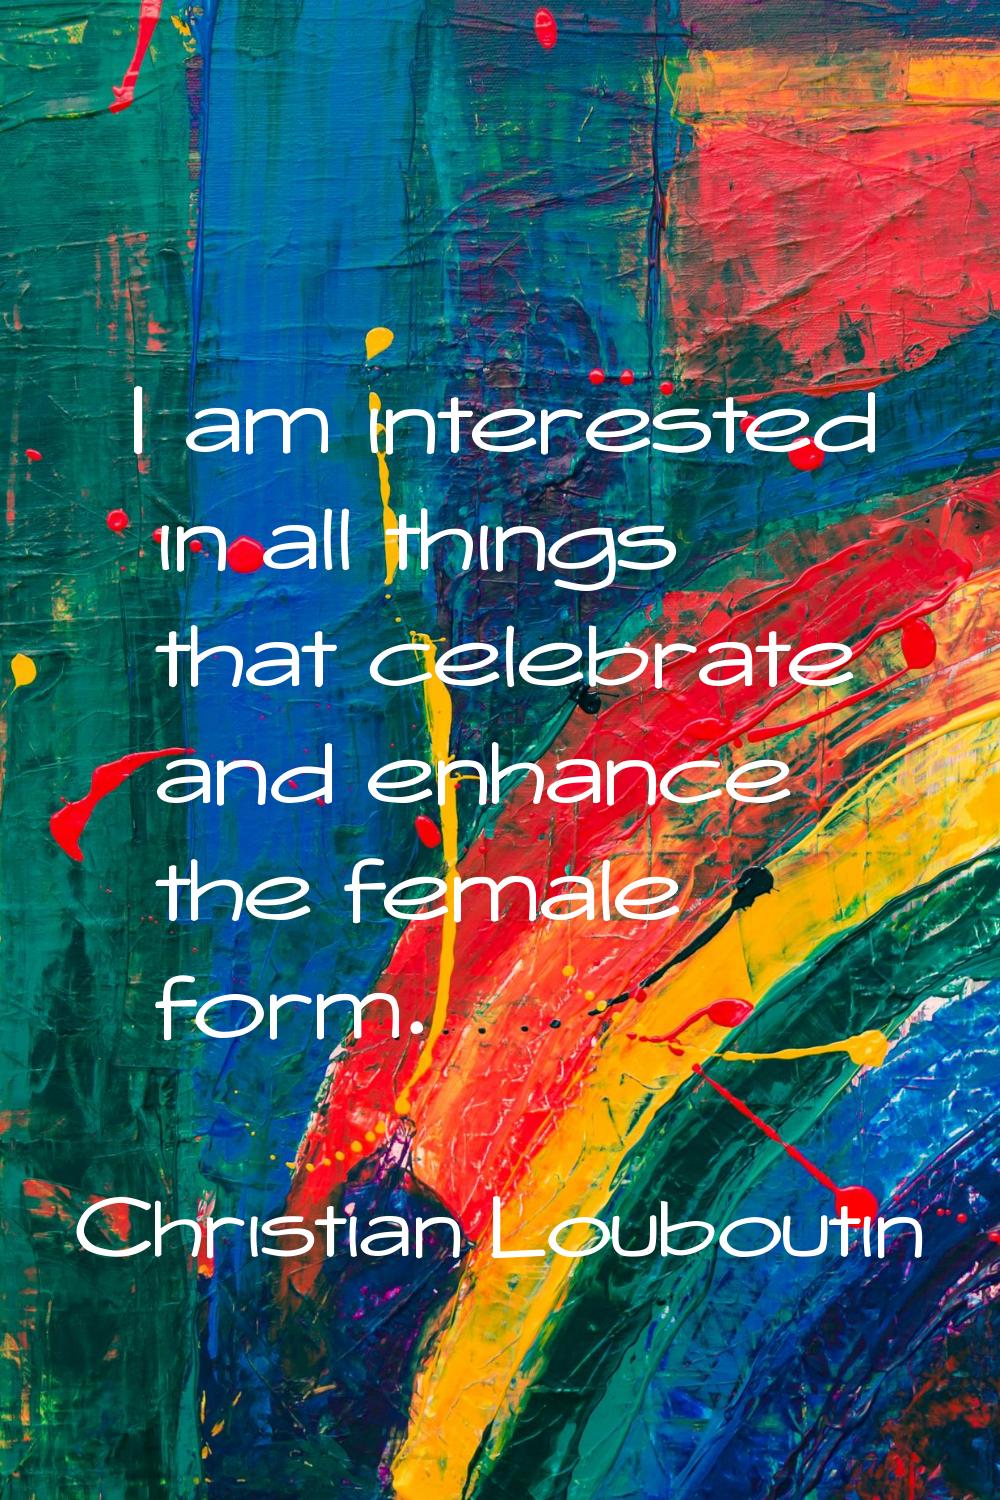 I am interested in all things that celebrate and enhance the female form.